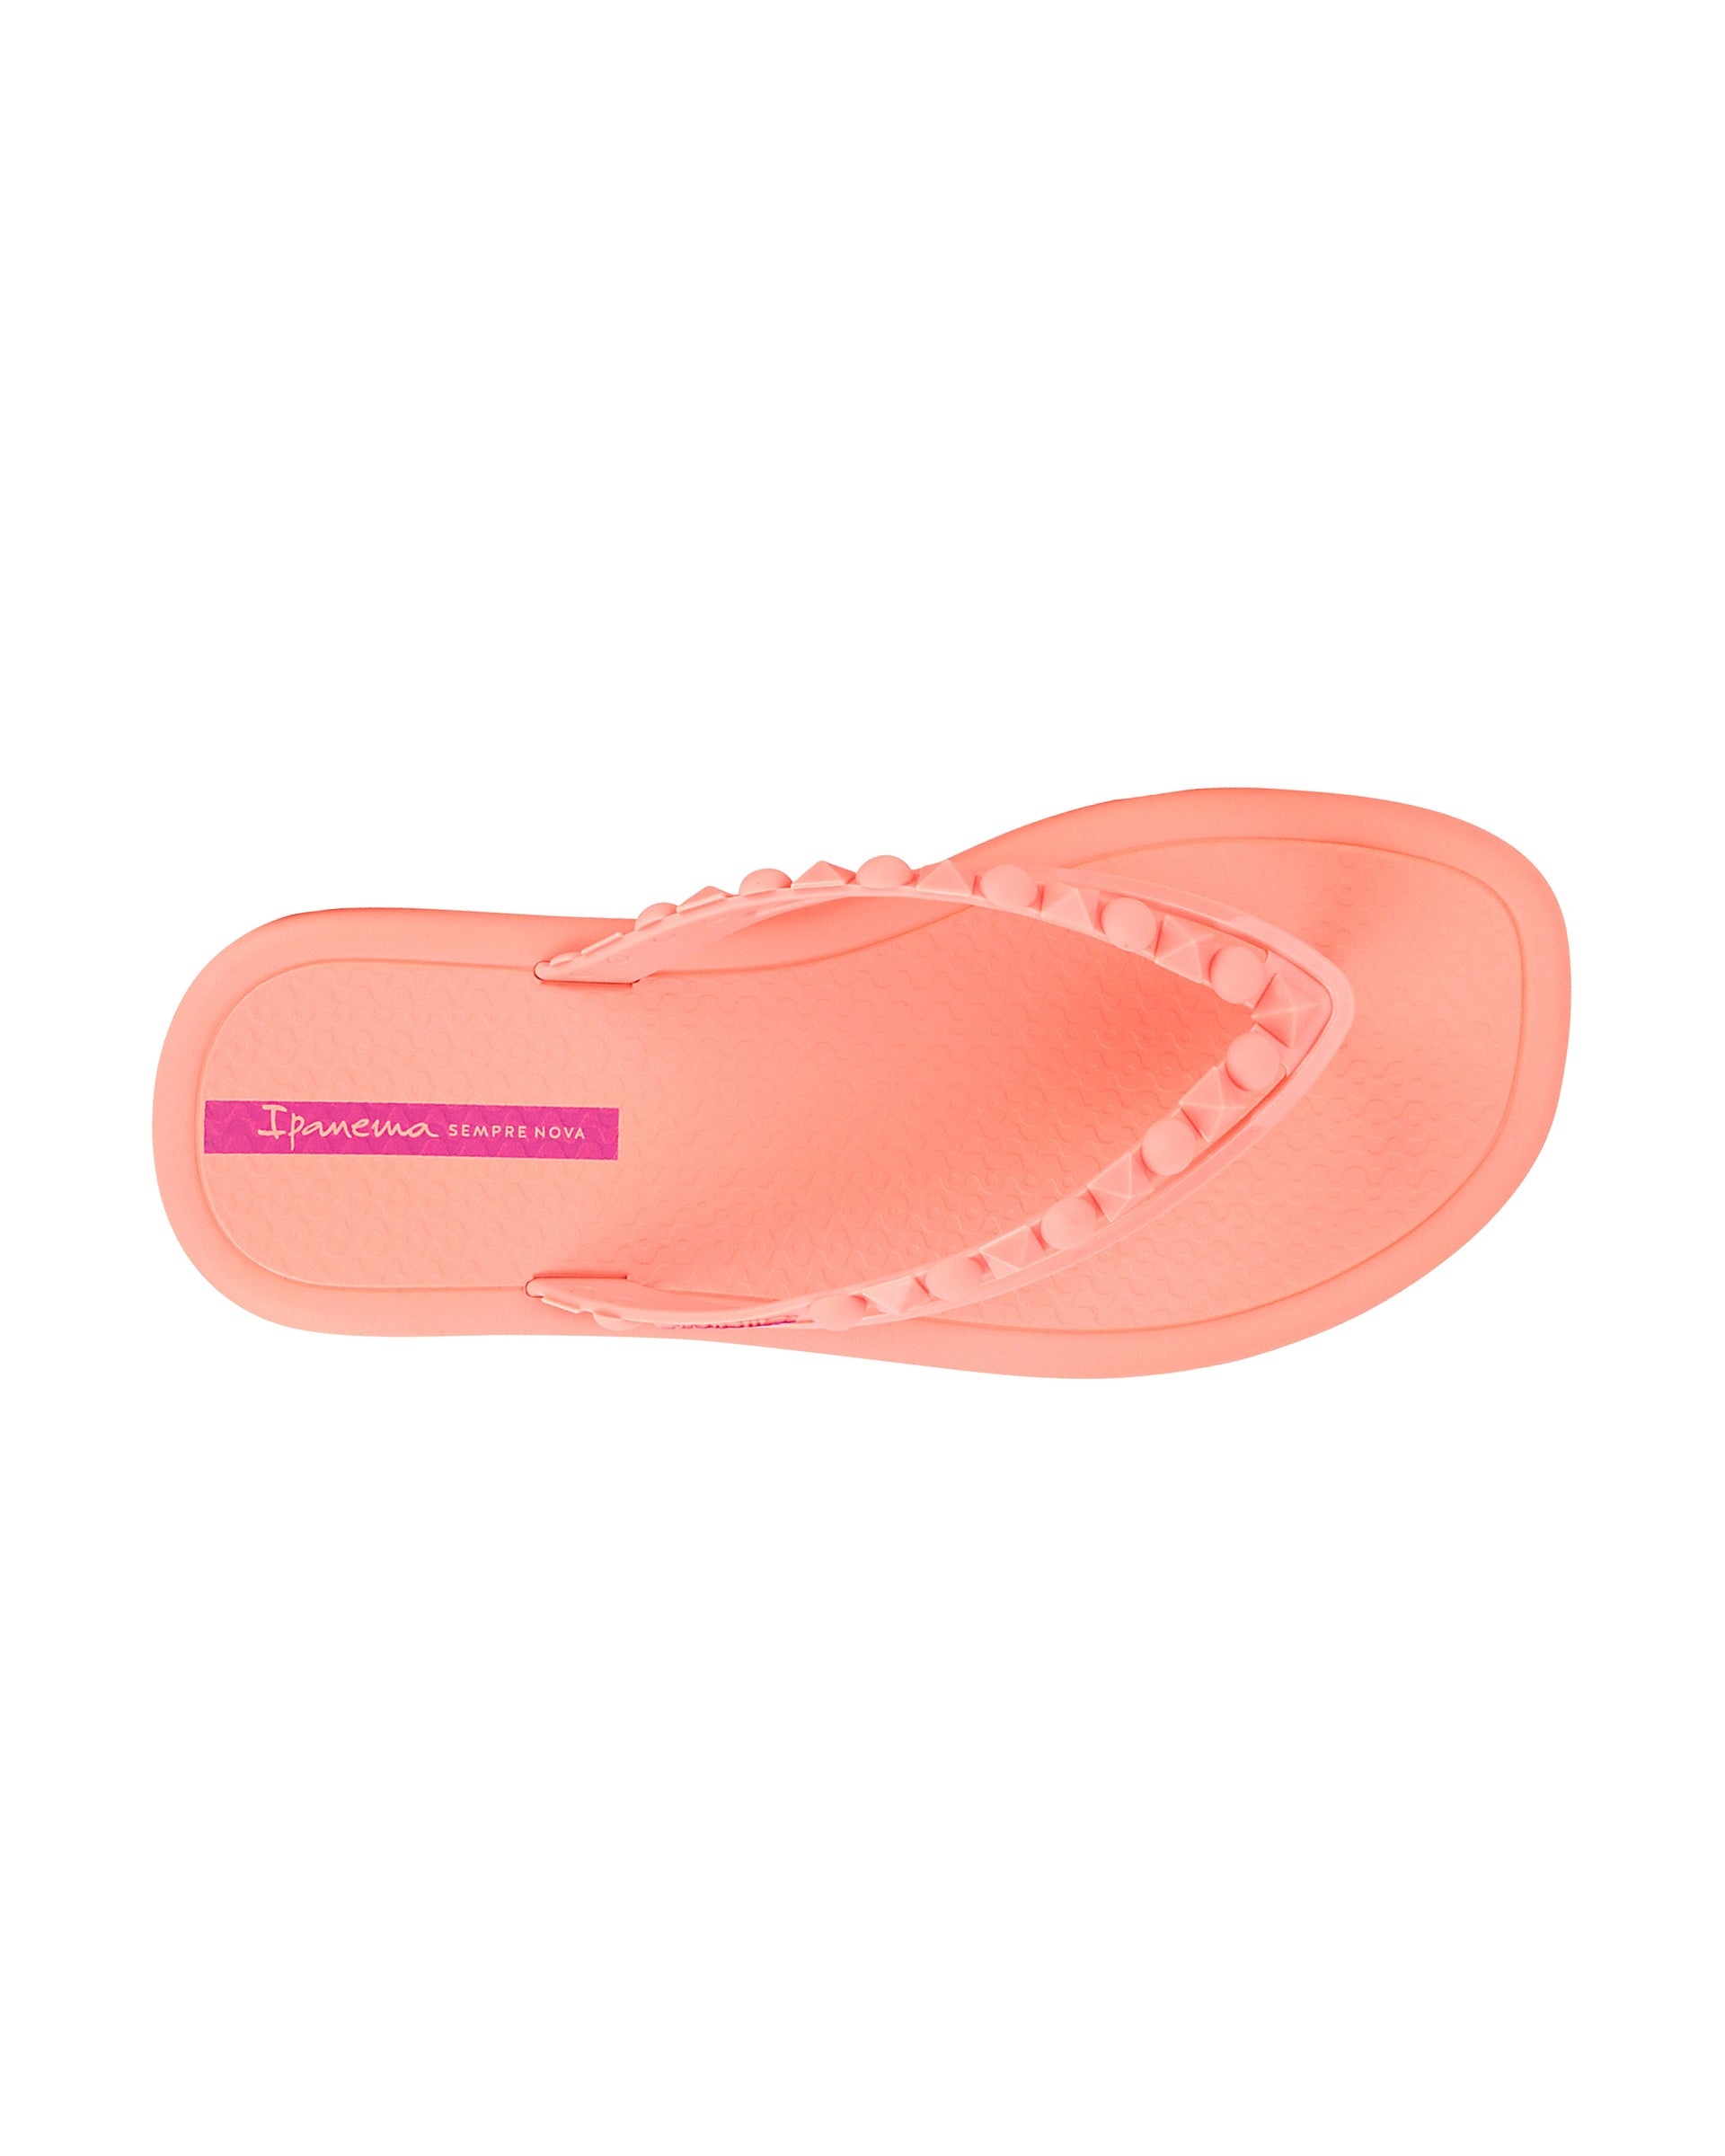 Top view of a light pink Ipanema Meu Sol women's flip flop with stud details on strap.